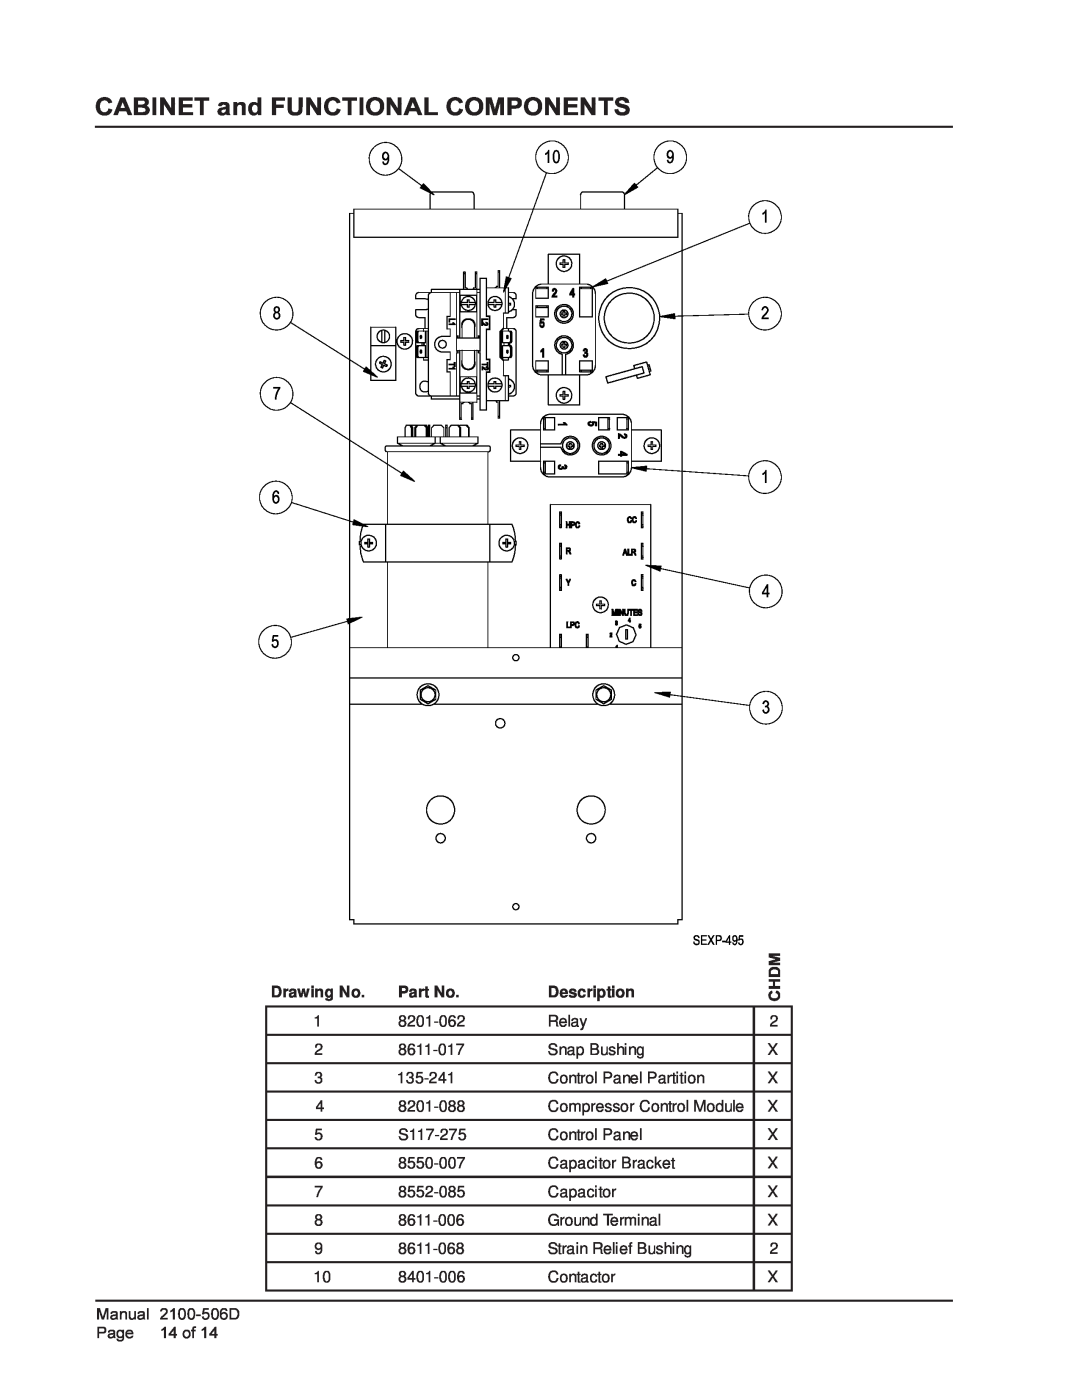 Bard CH3S1, CH4S1, CH5S1    ,     , CABINET and FUNCTIONAL COMPONENTS, Drawing No, Description 